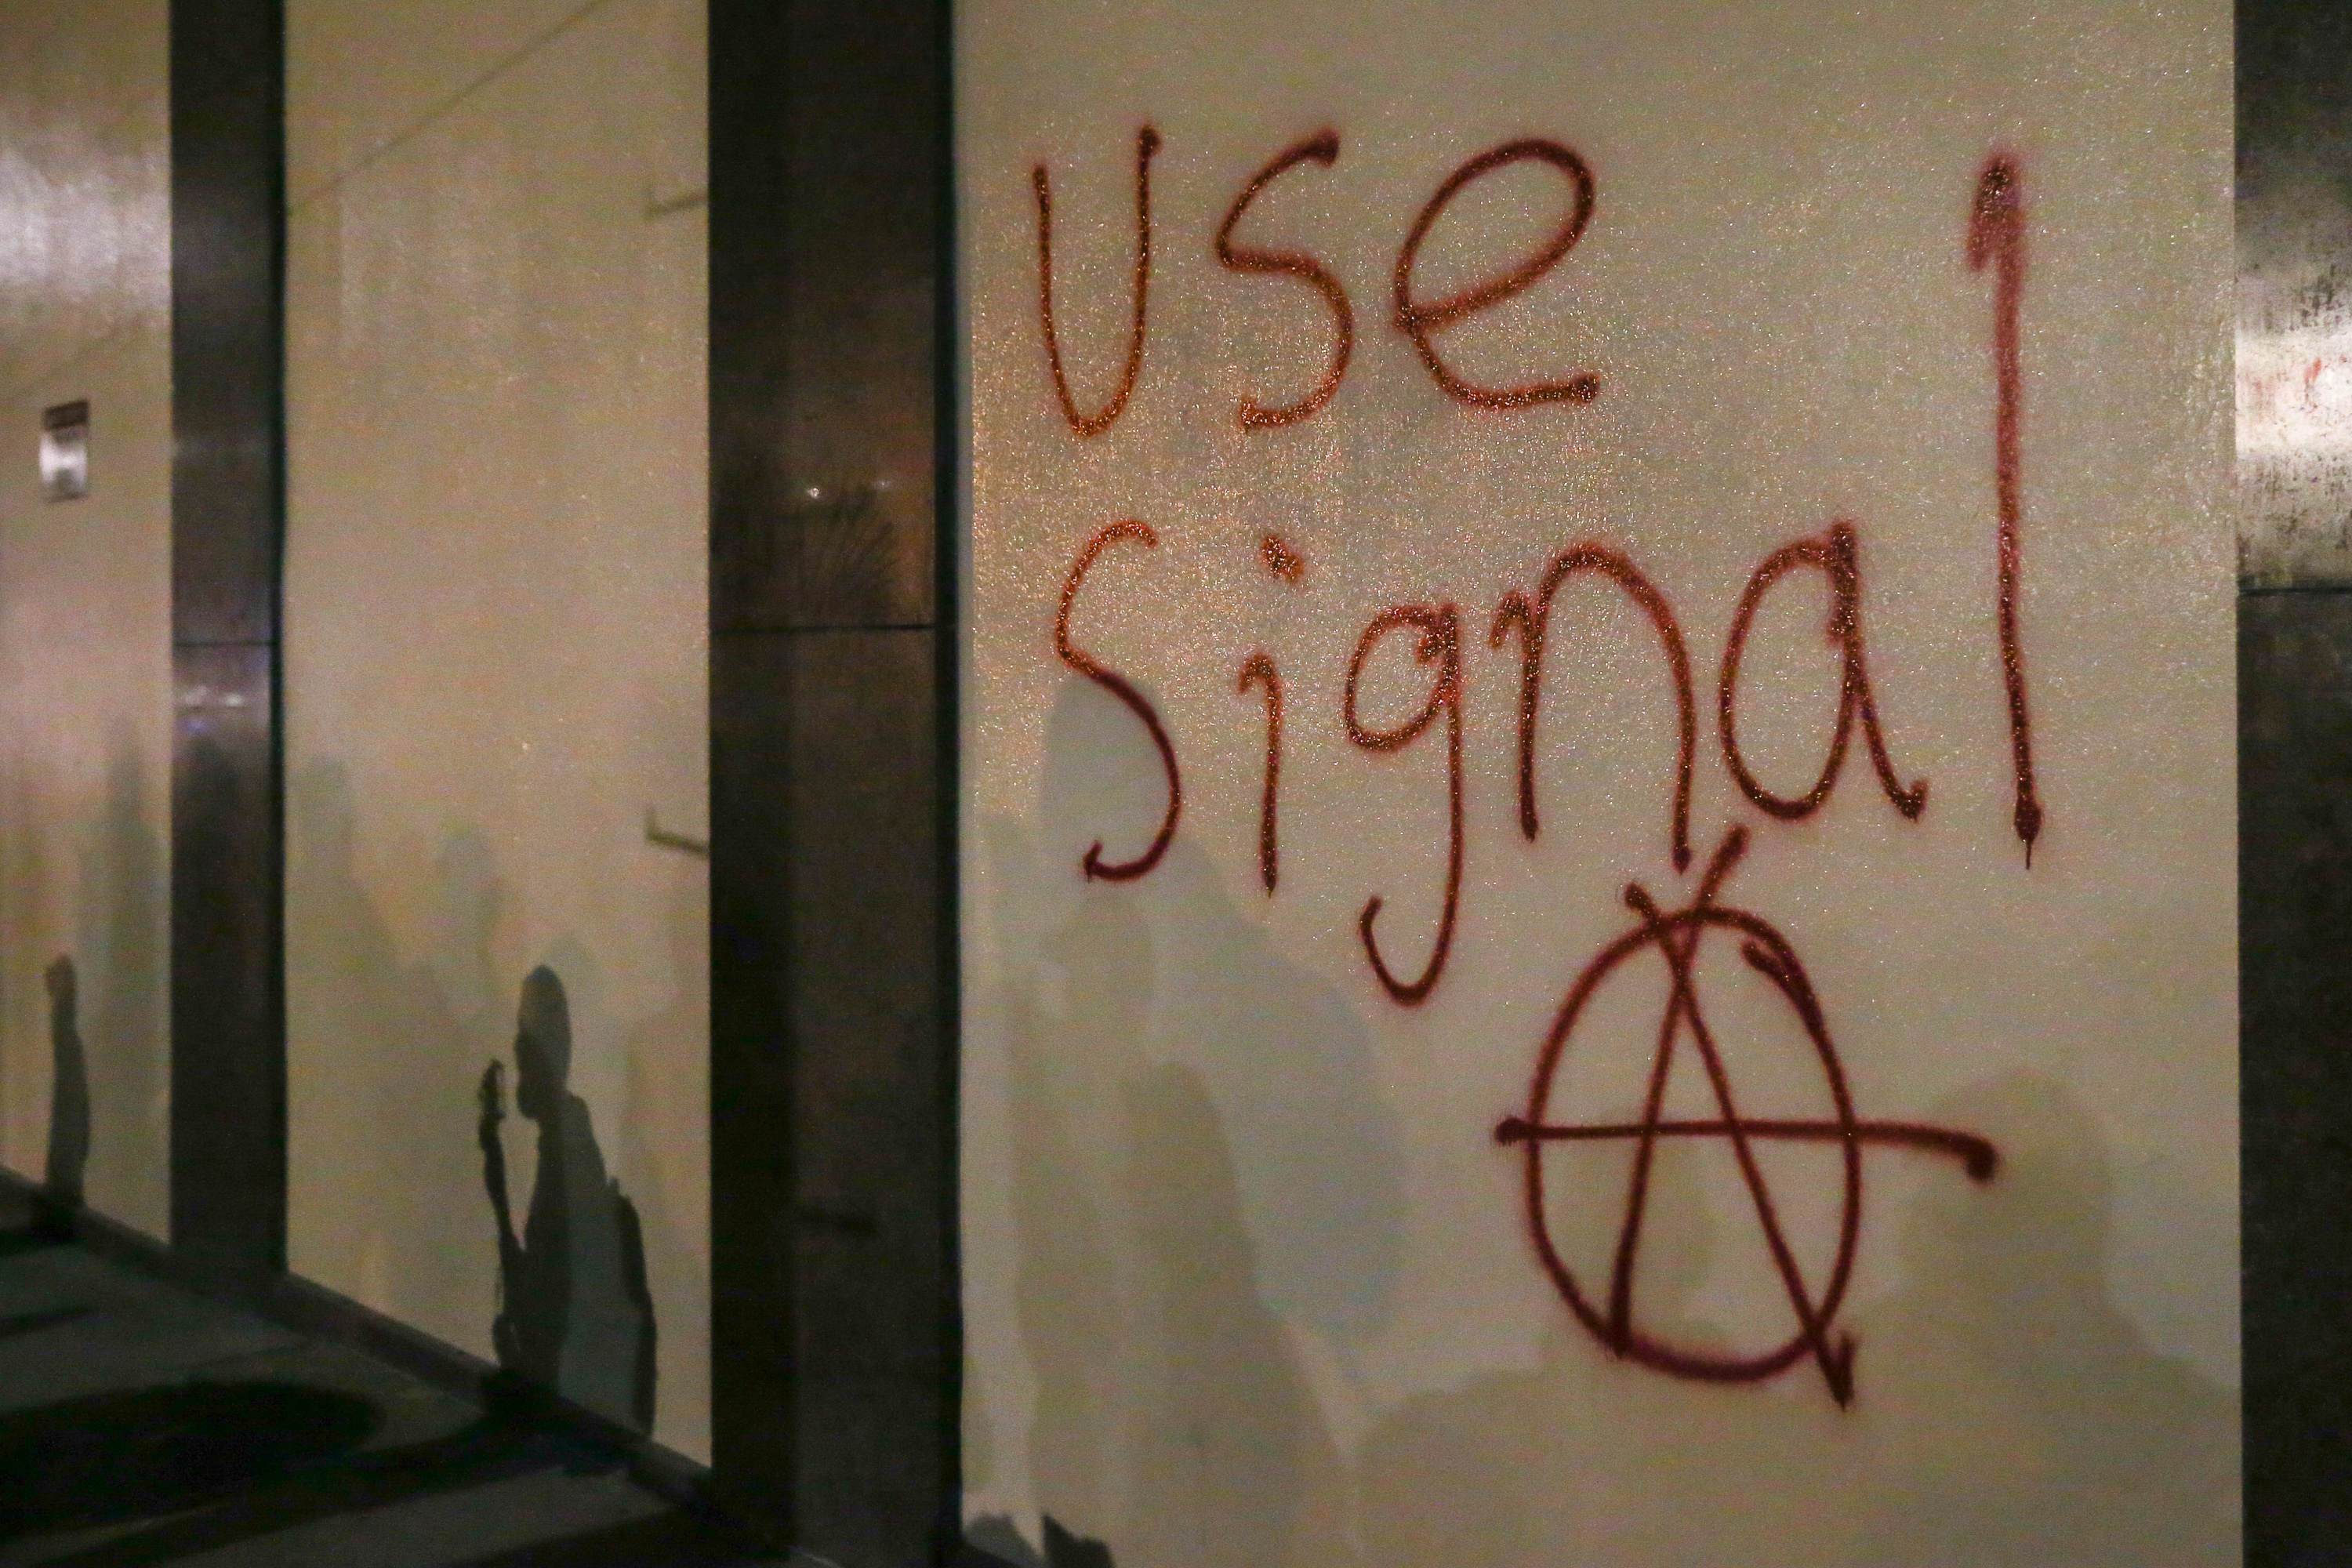 Grafitti urging people to use Signal is spray-painted on a wall during a protest on February 1, 2017 at UC Berkeley, California.